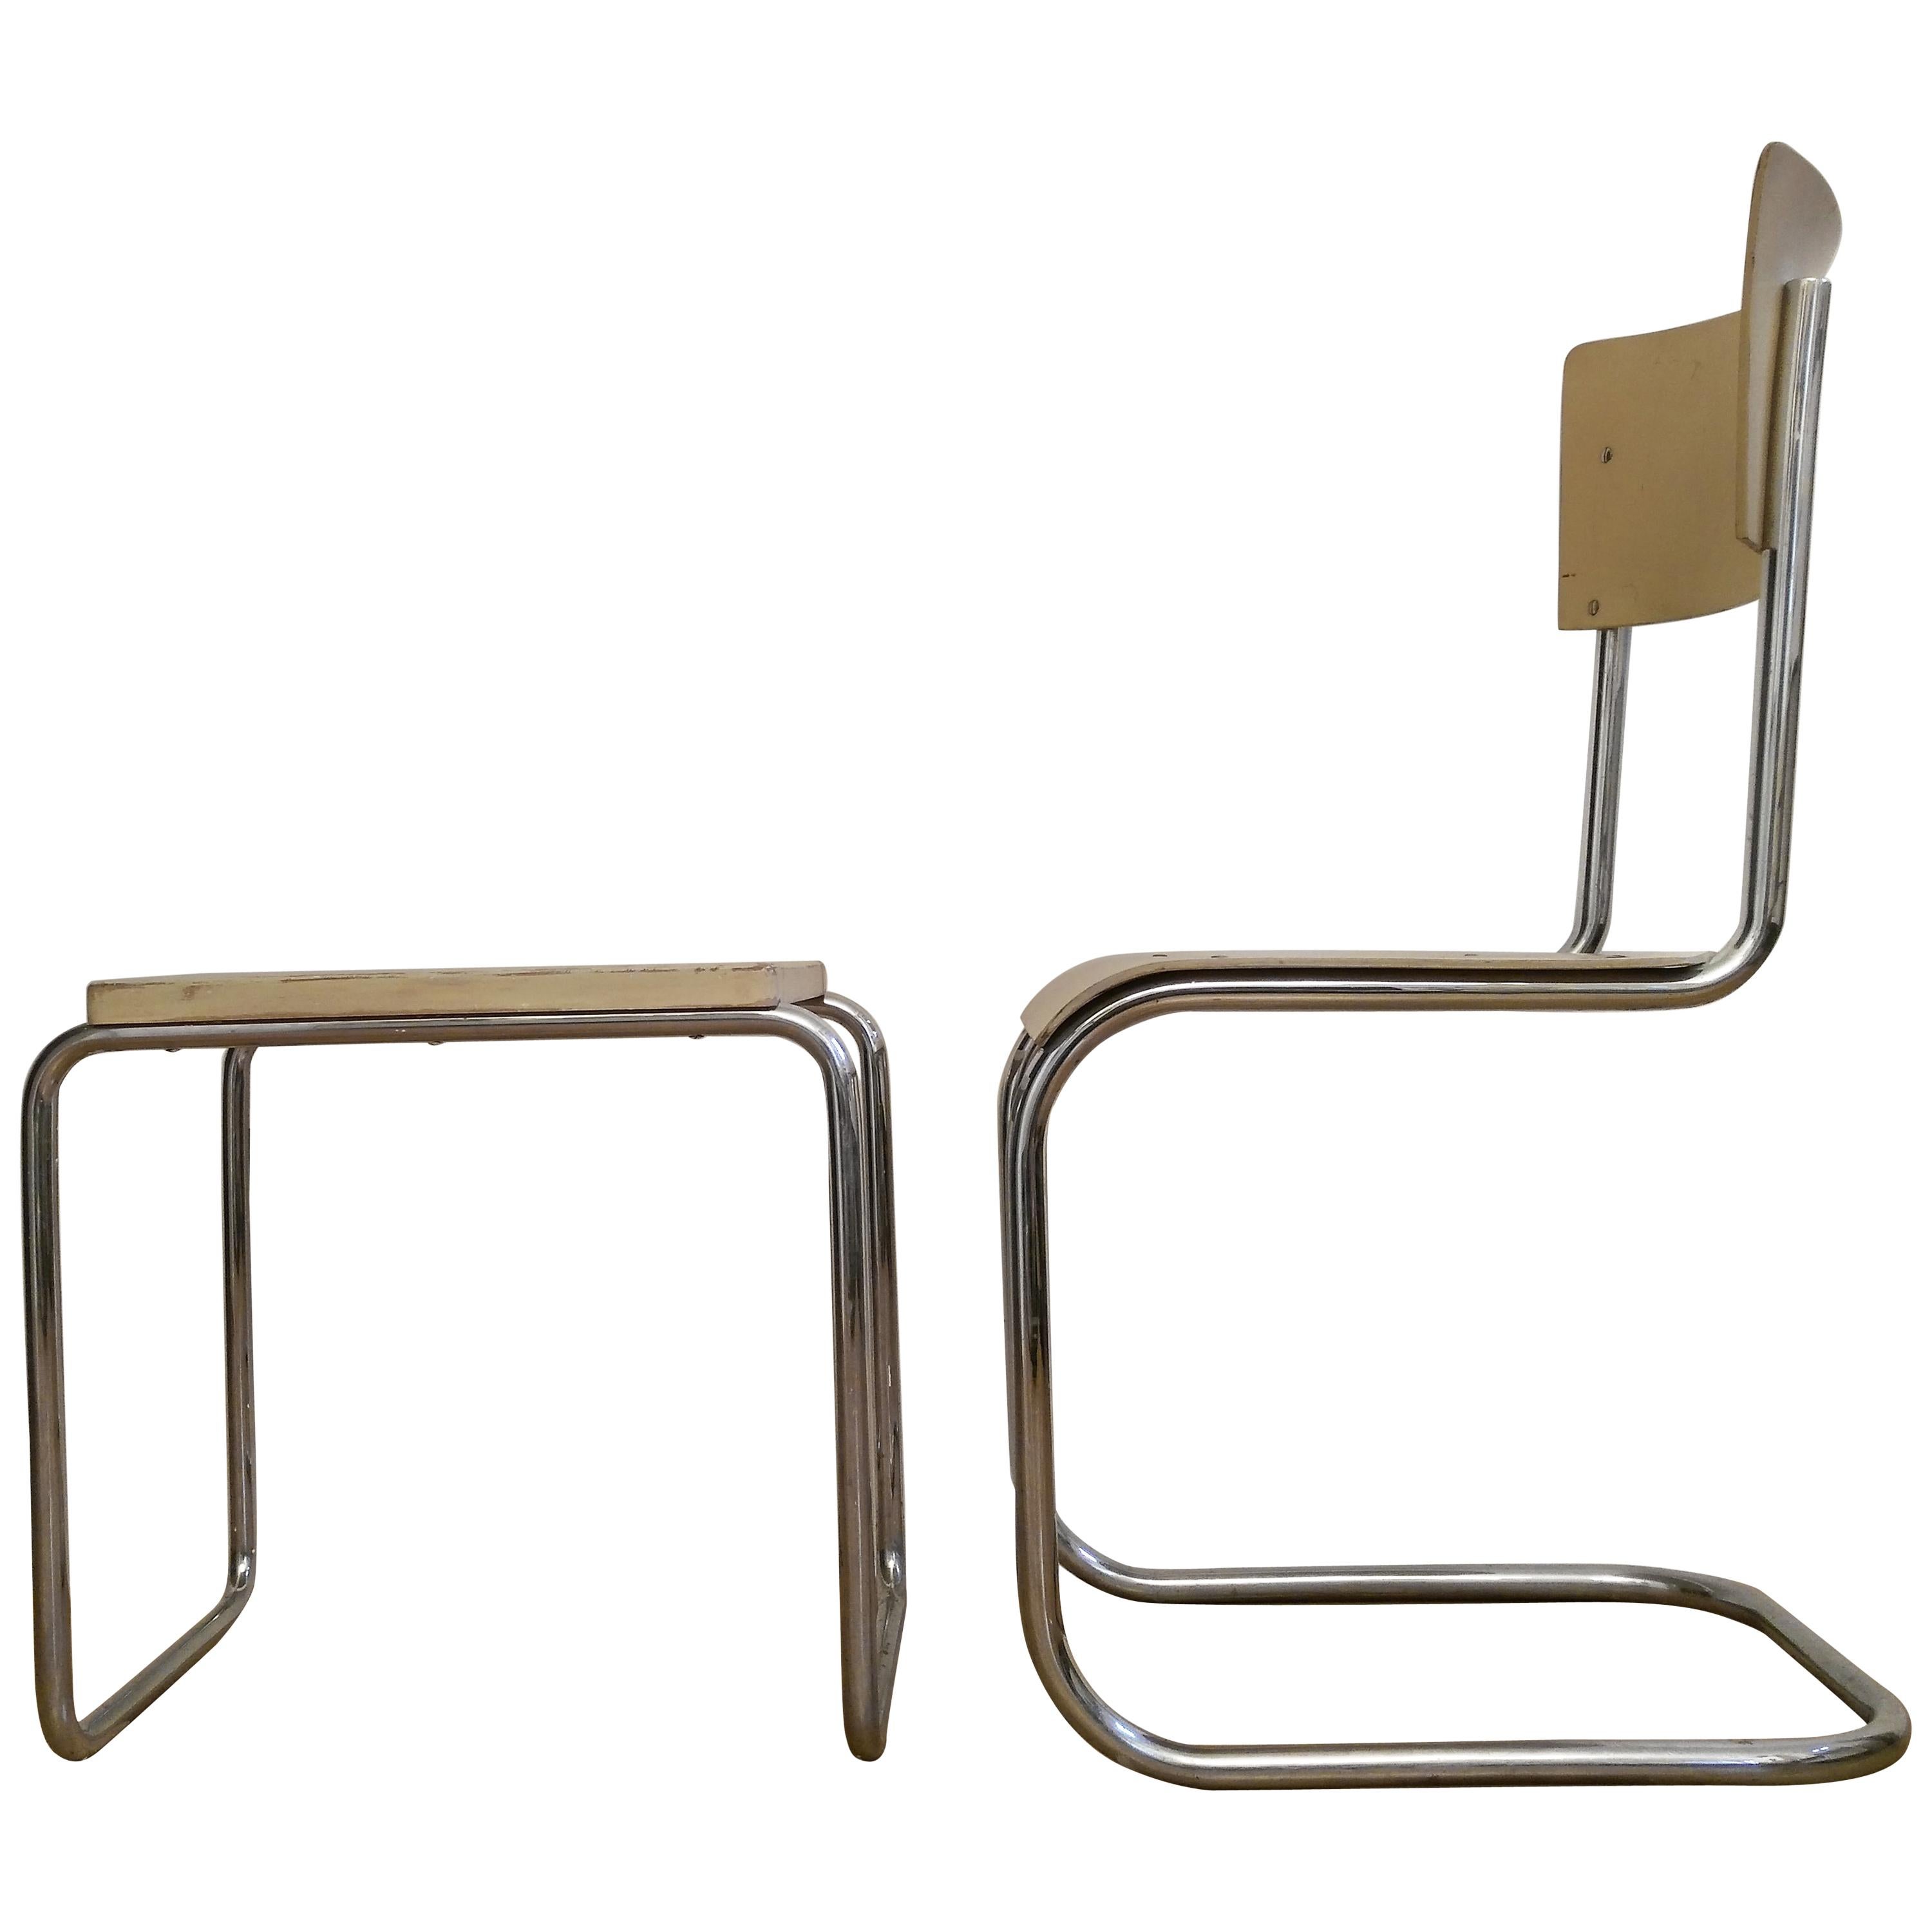 Chrome Bauhaus Mart Stam Chair and Stool, 1930s For Sale